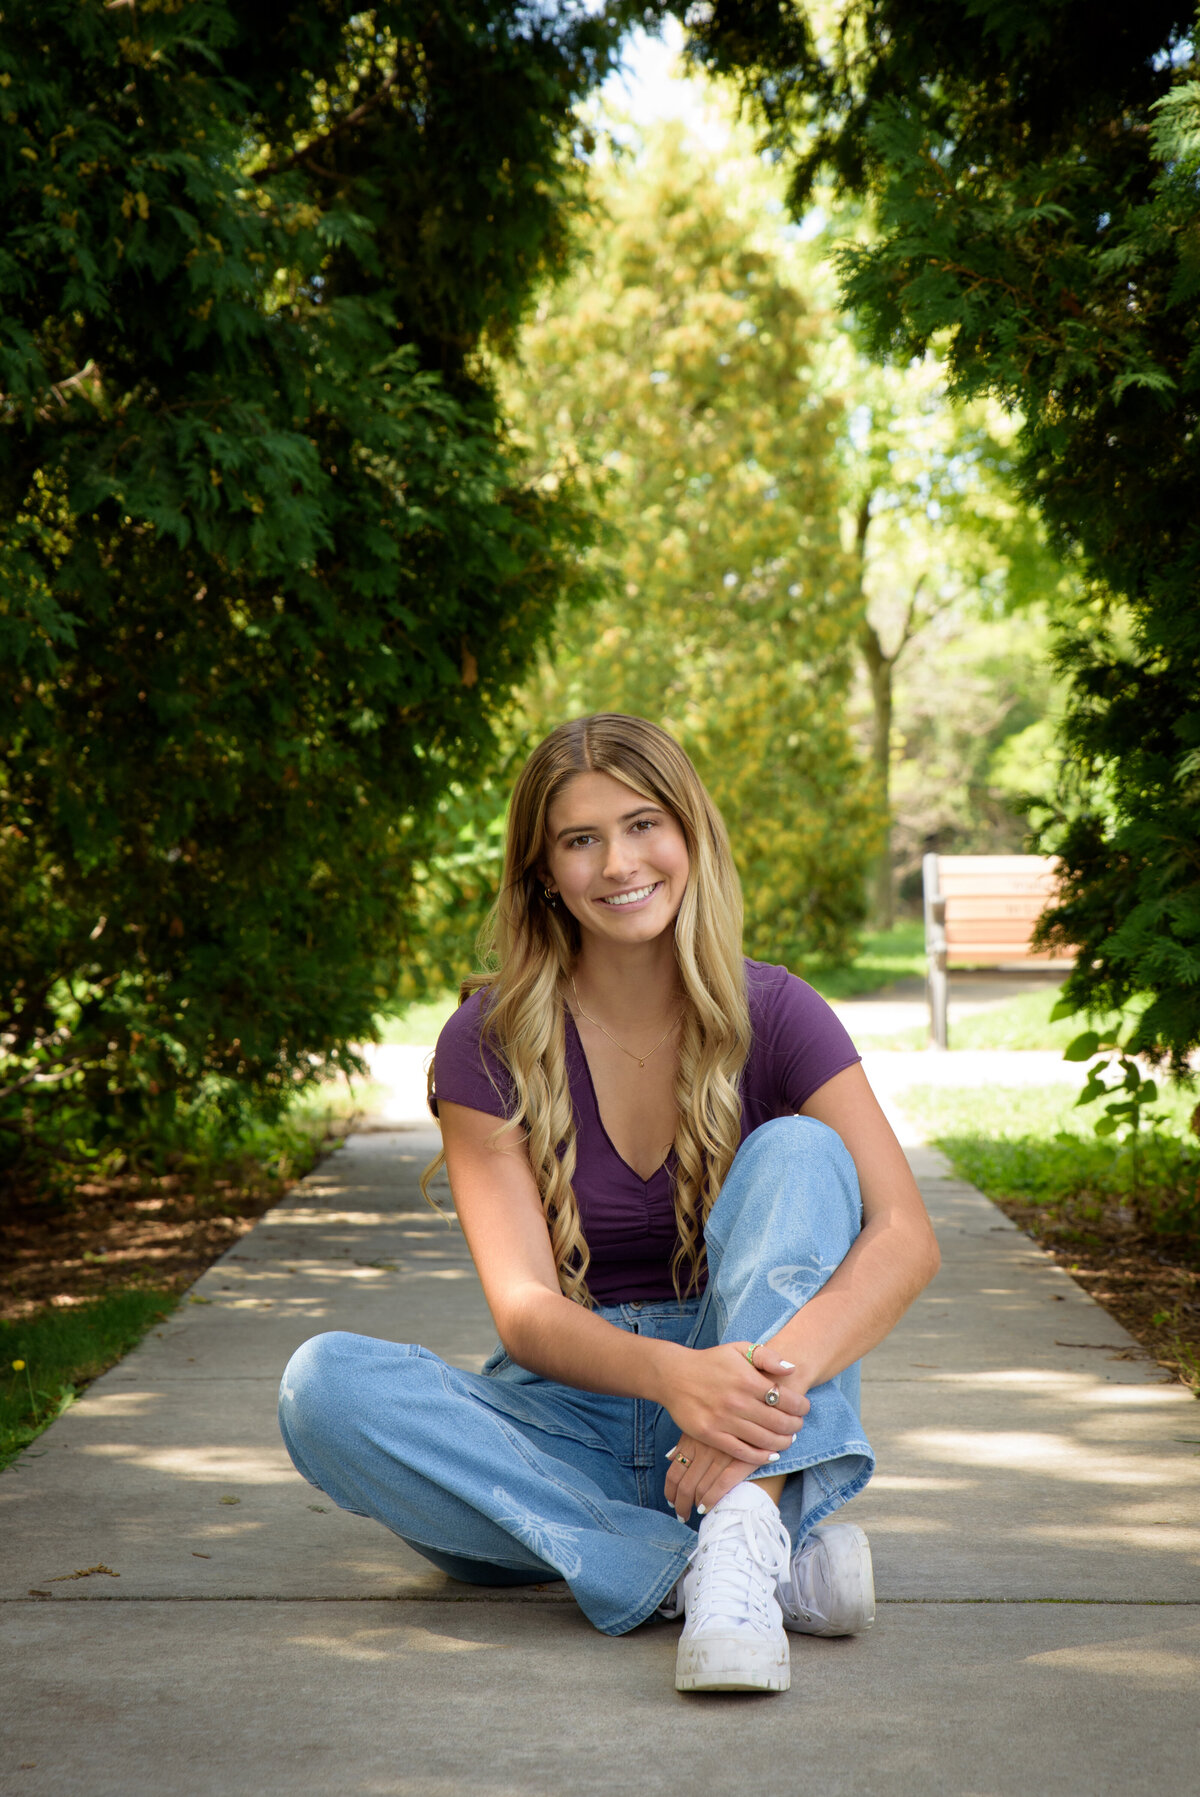 De Pere High School senior girl wearing a purple shirt and jeans sitting on a sidewalk in Voyager Park in downtown De Pere, Wisconsin